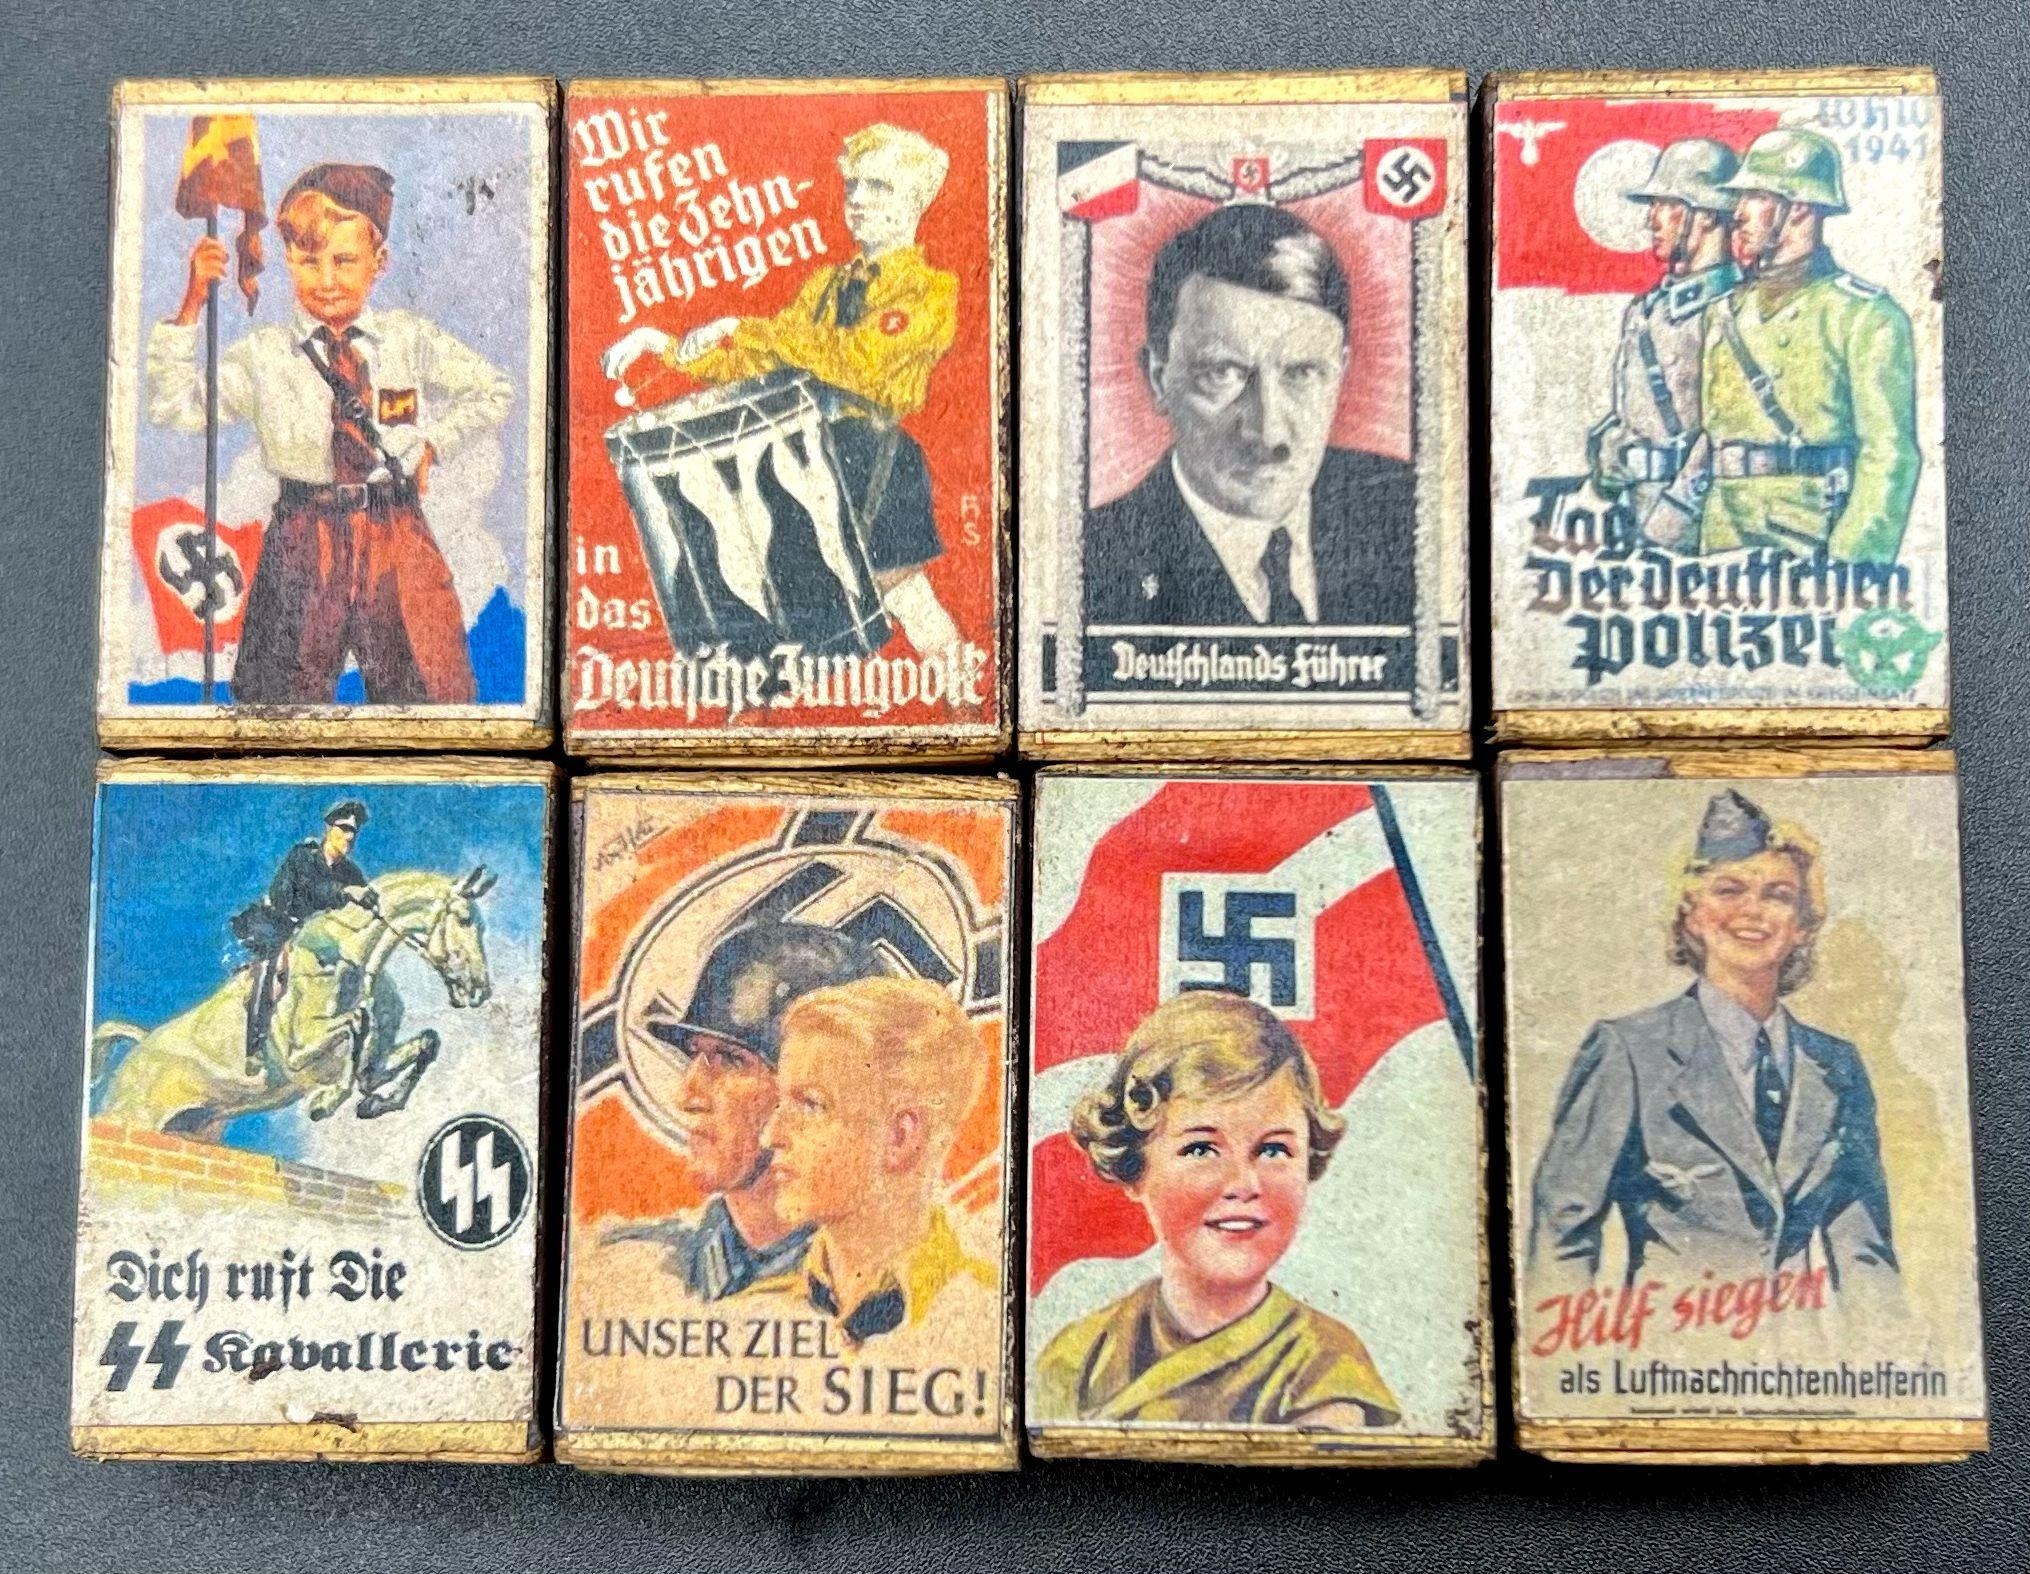 8 x Mini Boxes of Matches. As sold by blind veterans, Hitler Youth etc.